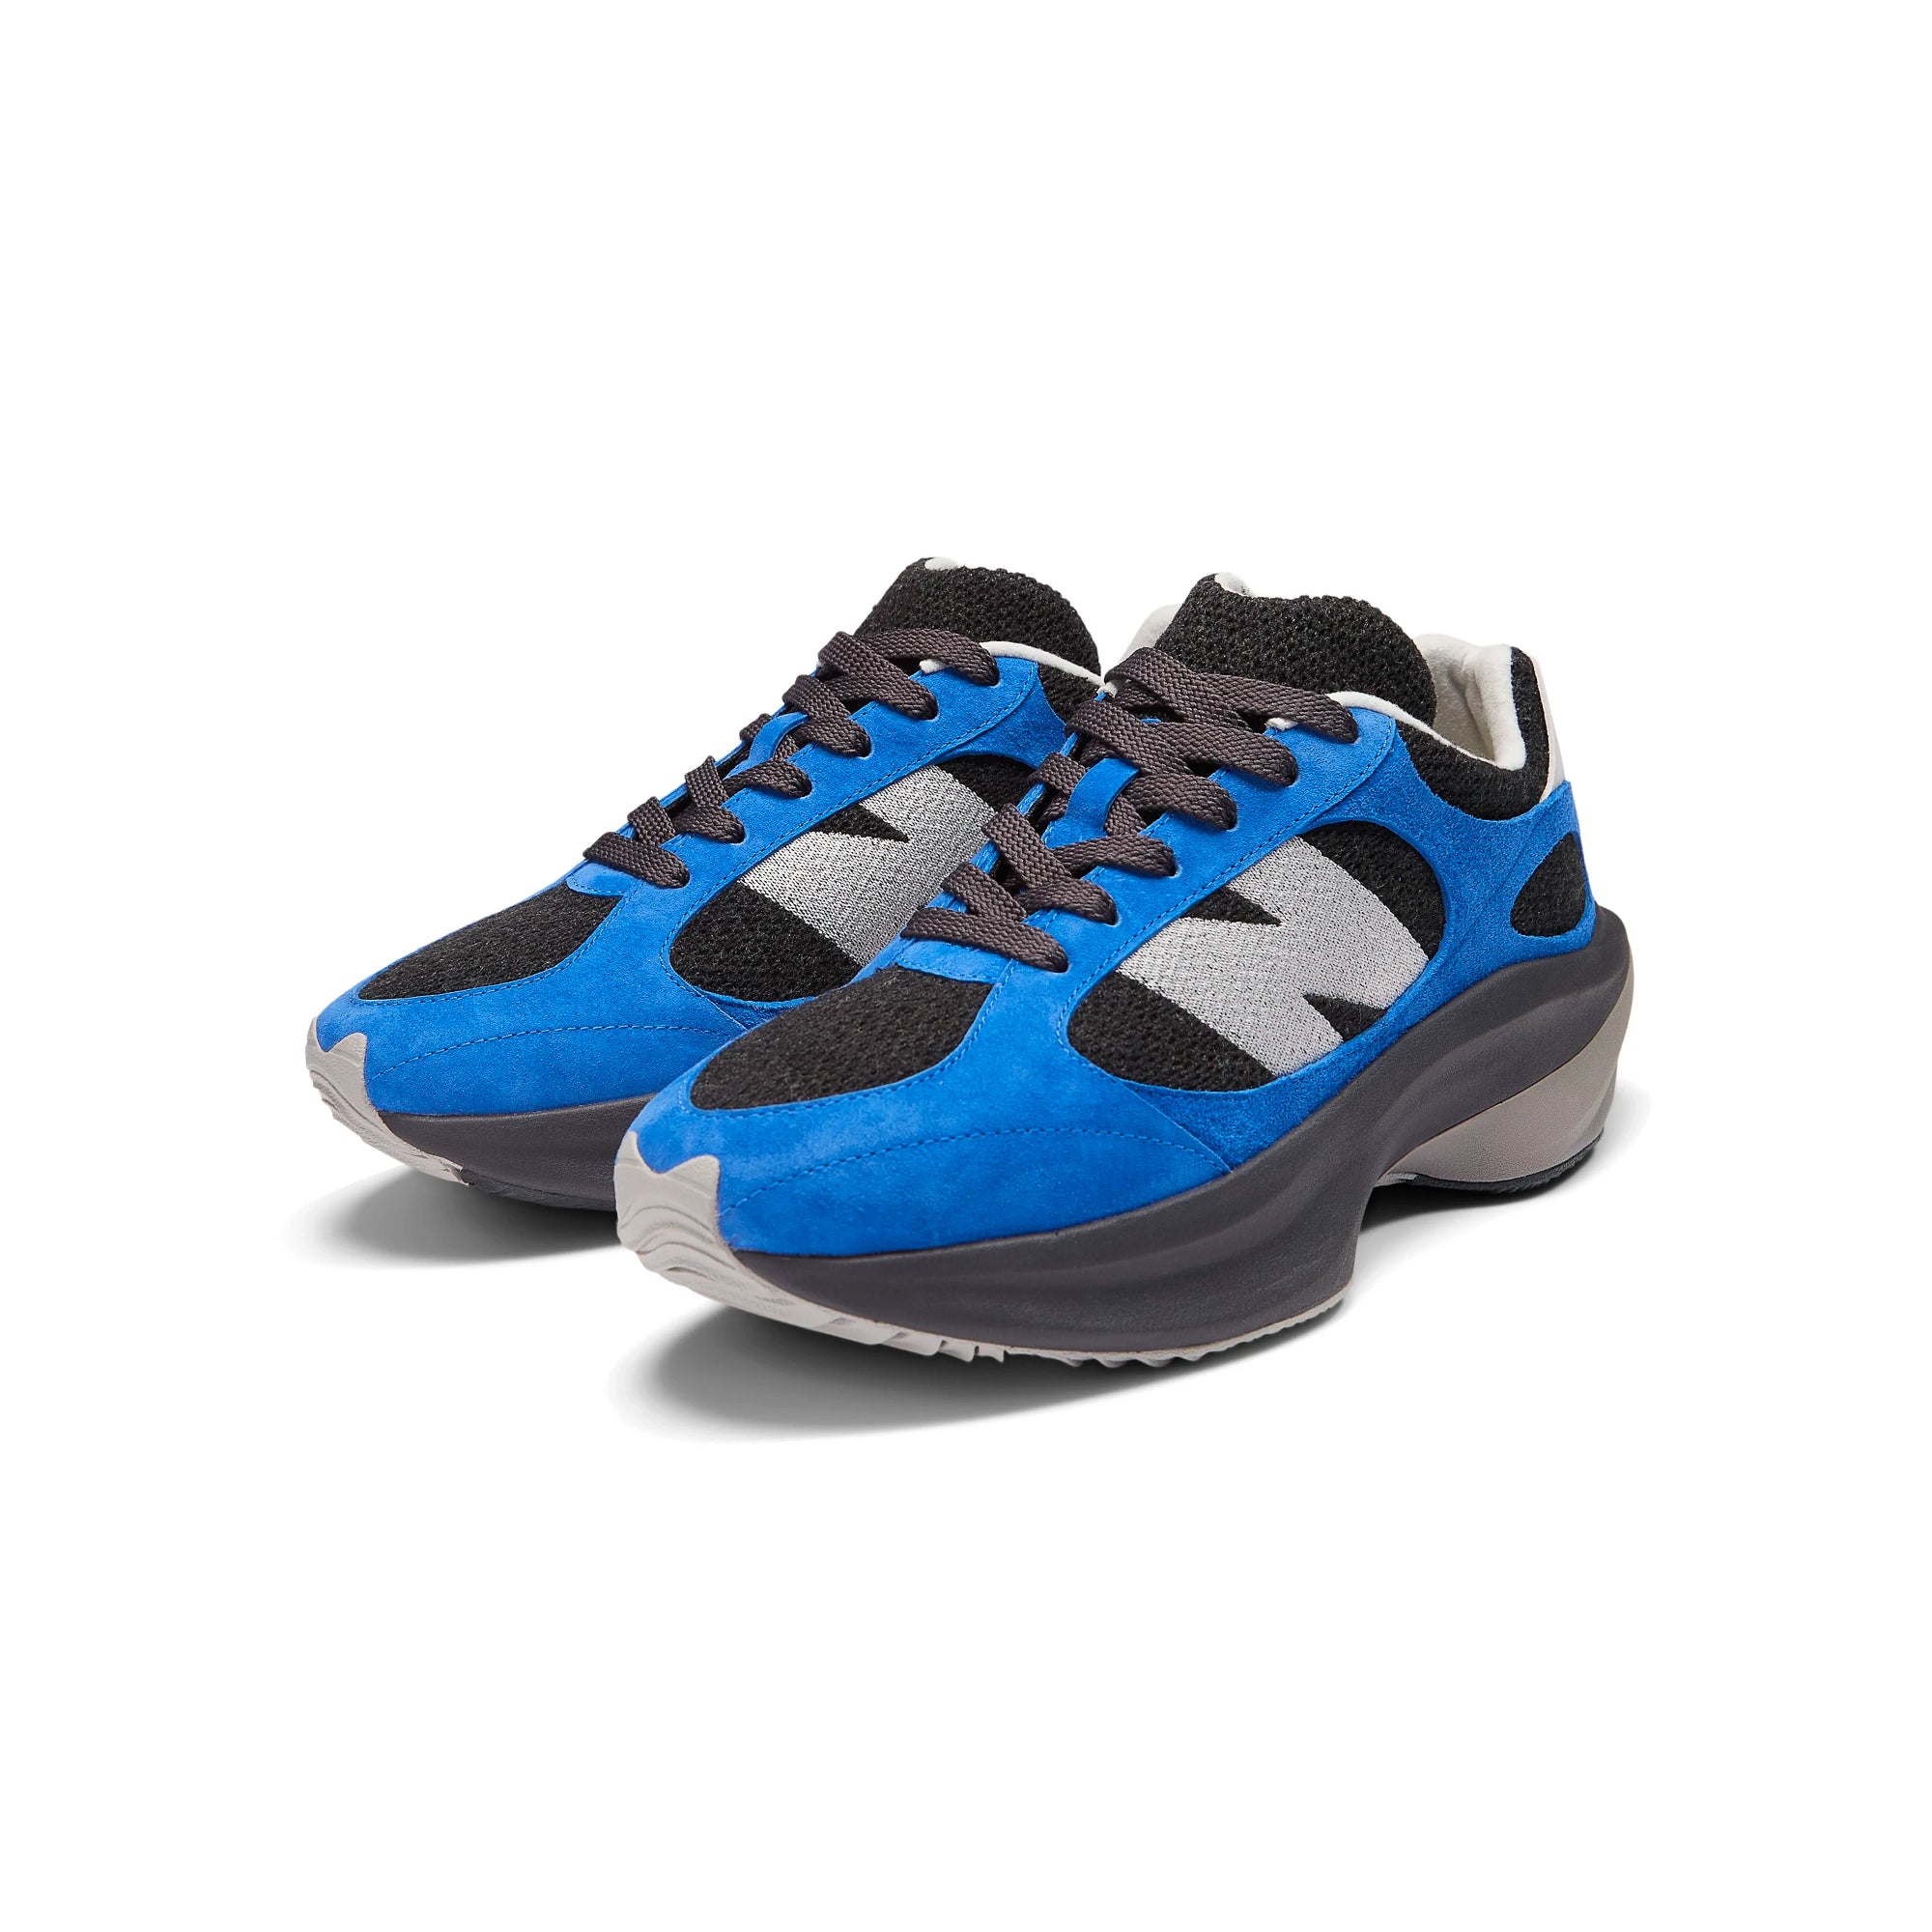 New Balance x Auralee Mens WRPD Shoes